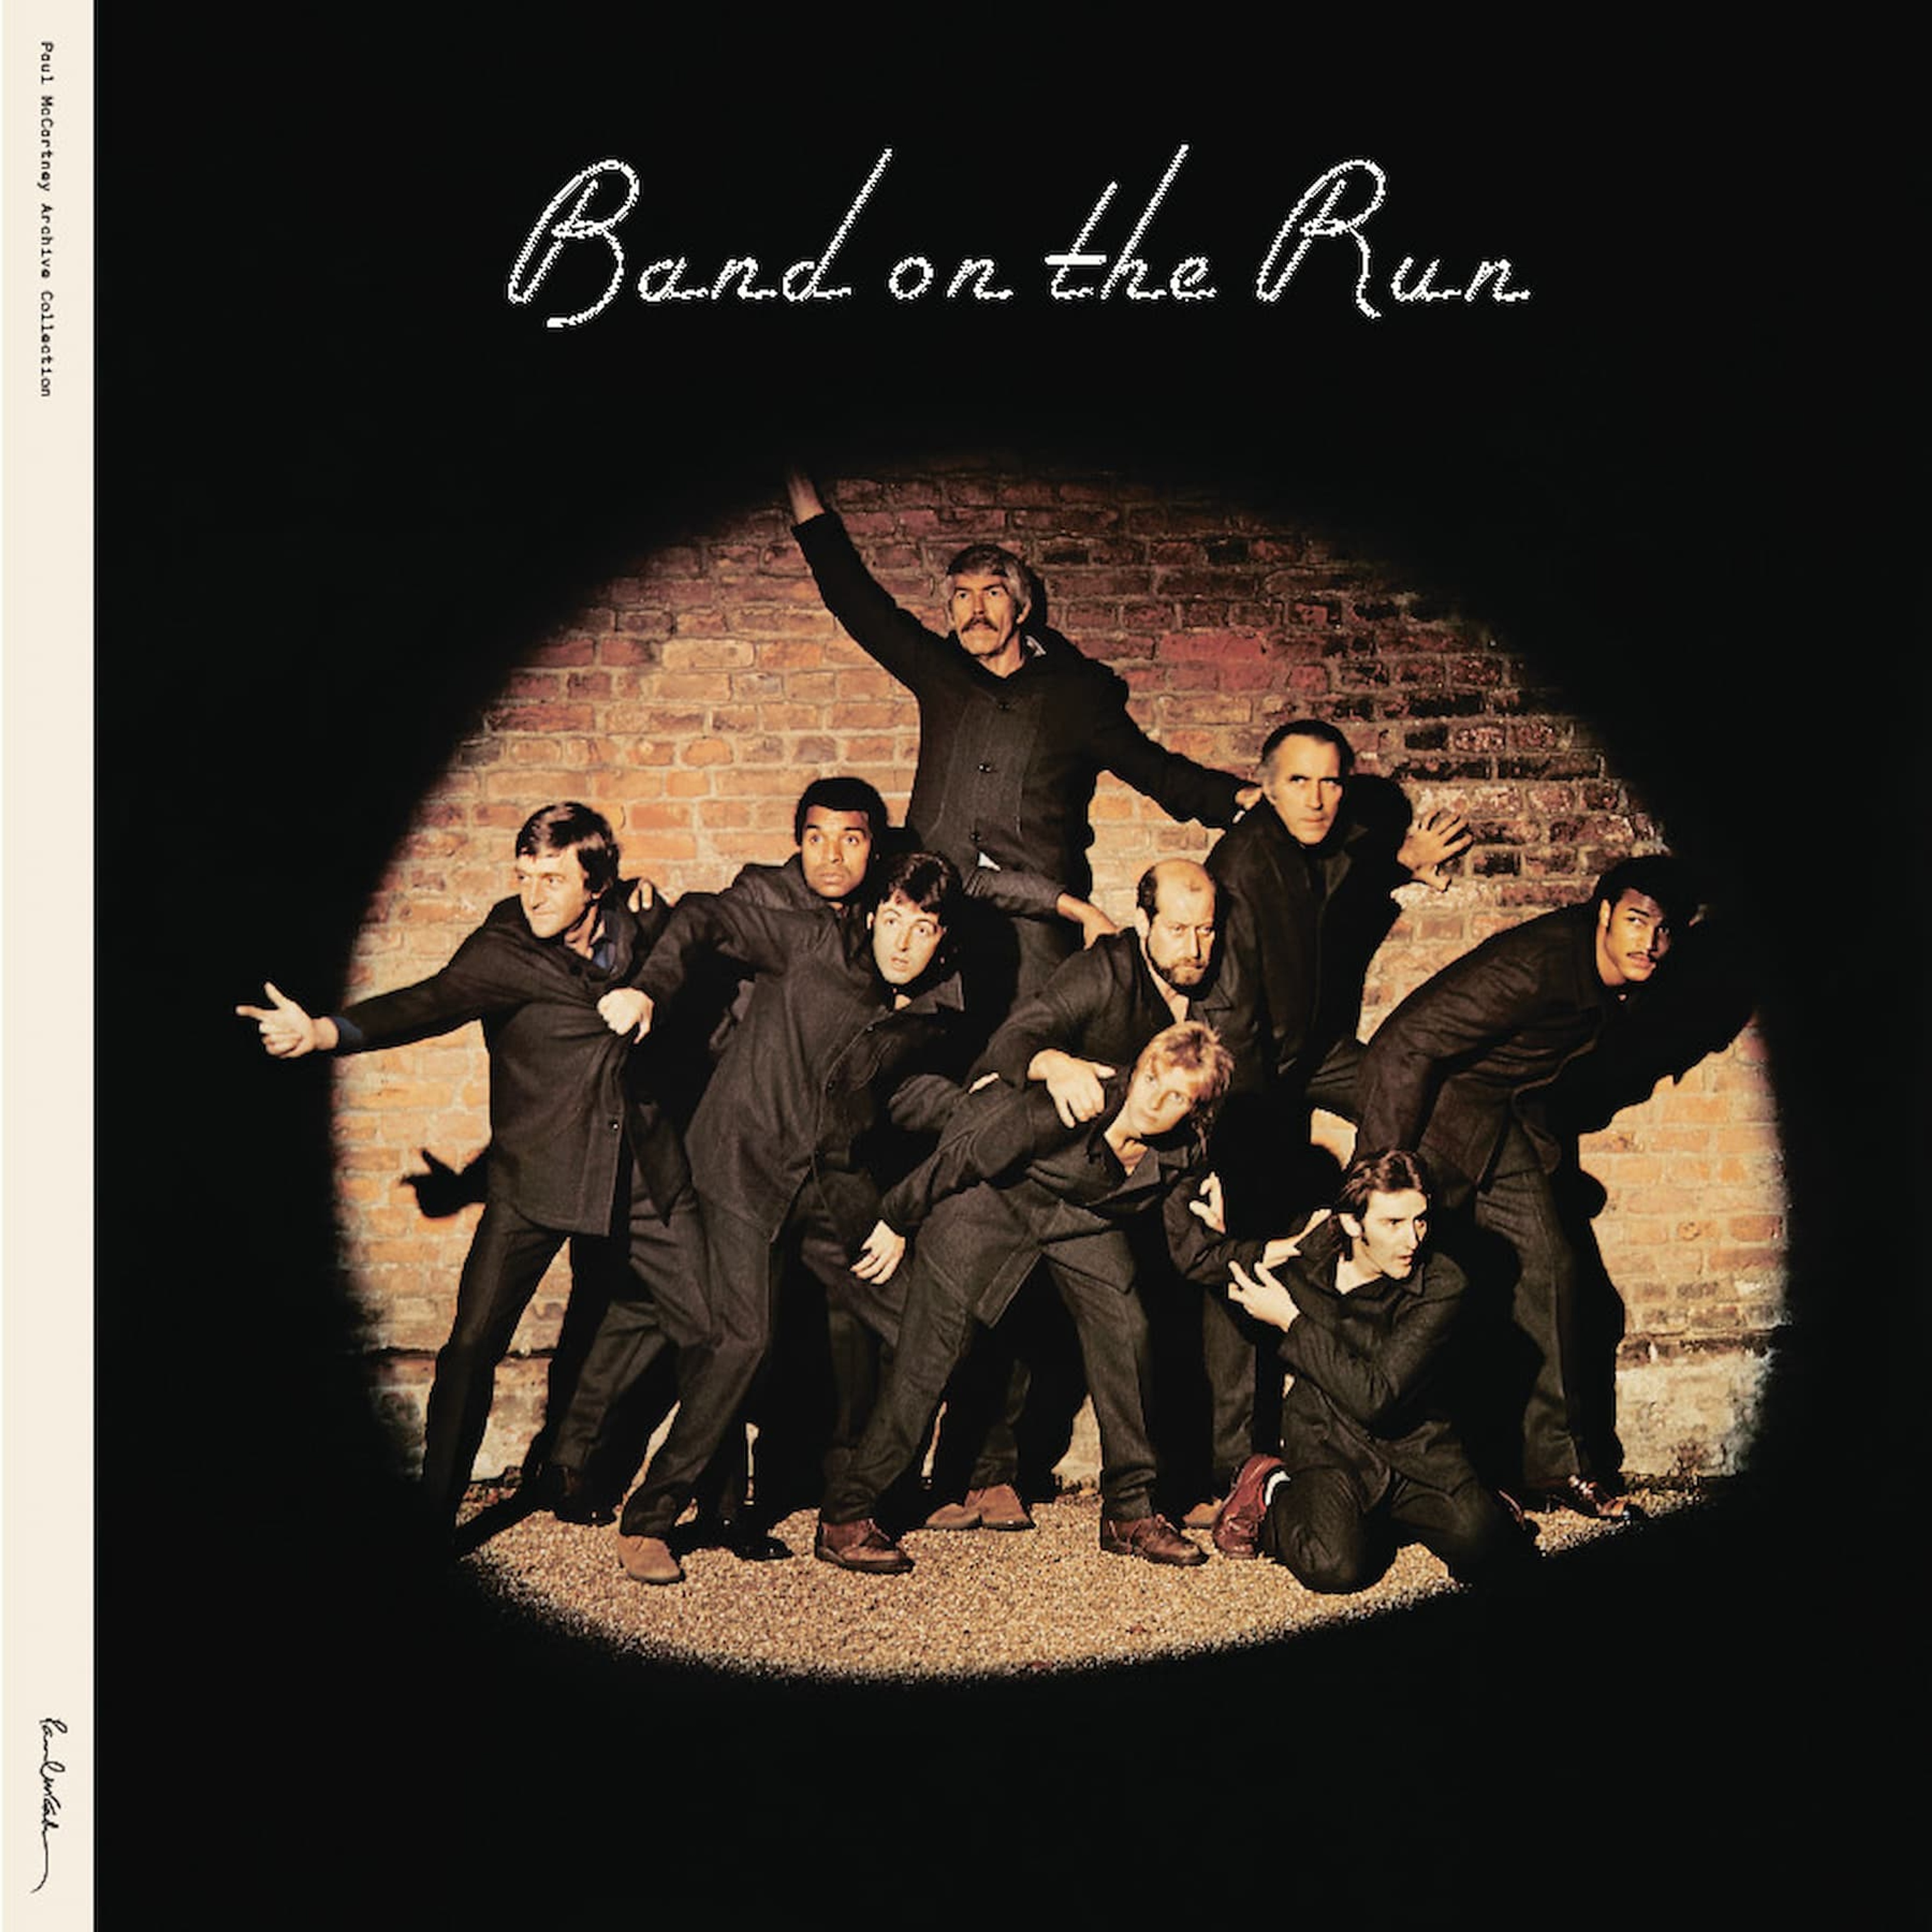 Band On The Run (Archive Collection) Album cover